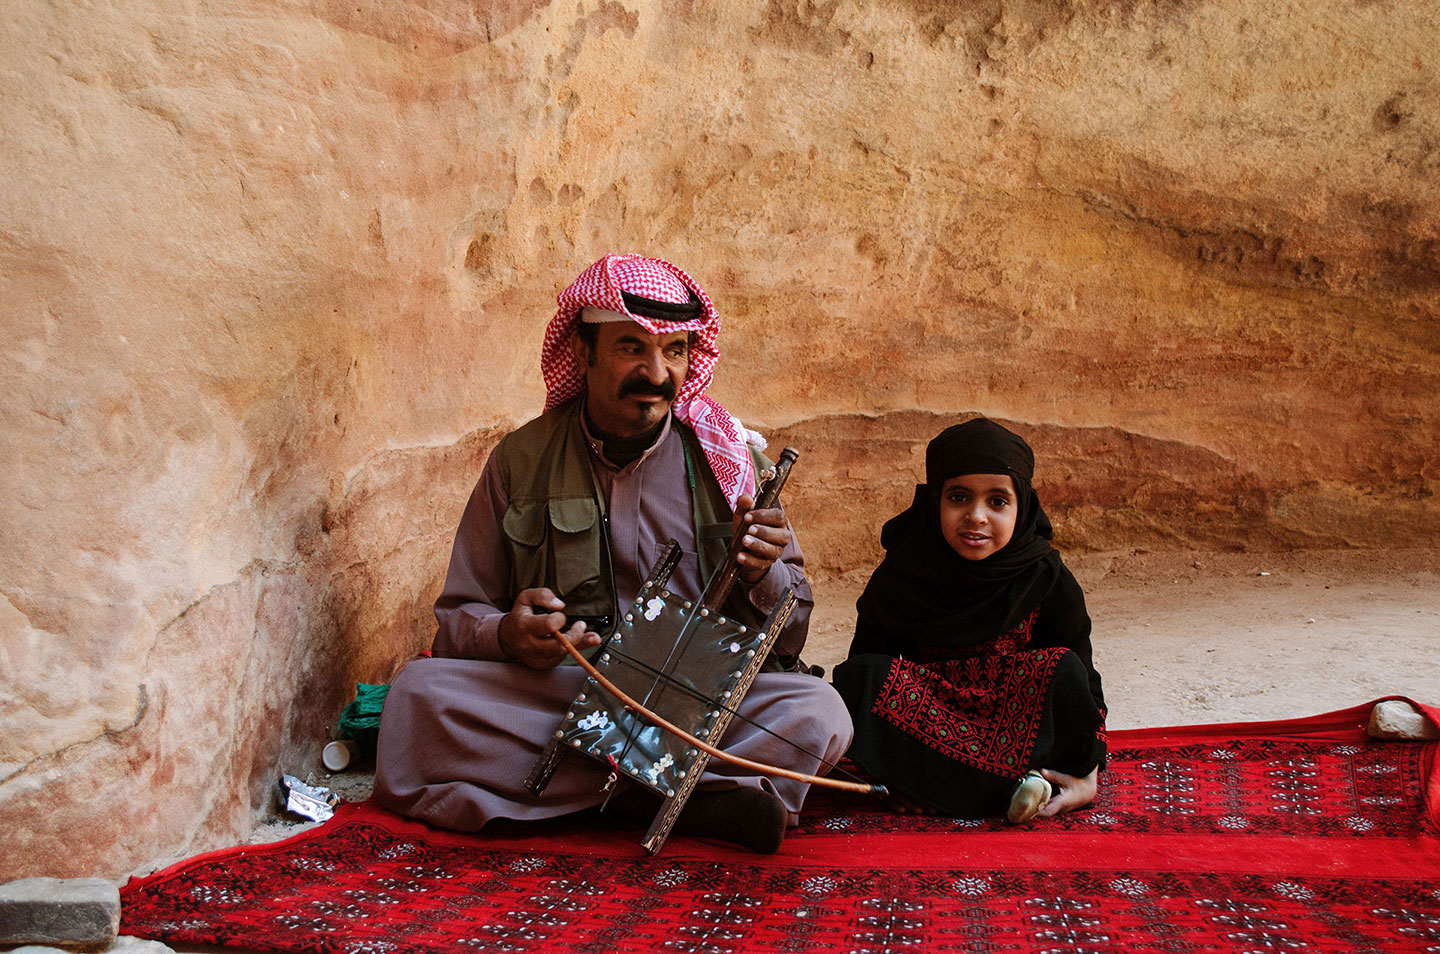 A day with bedouins